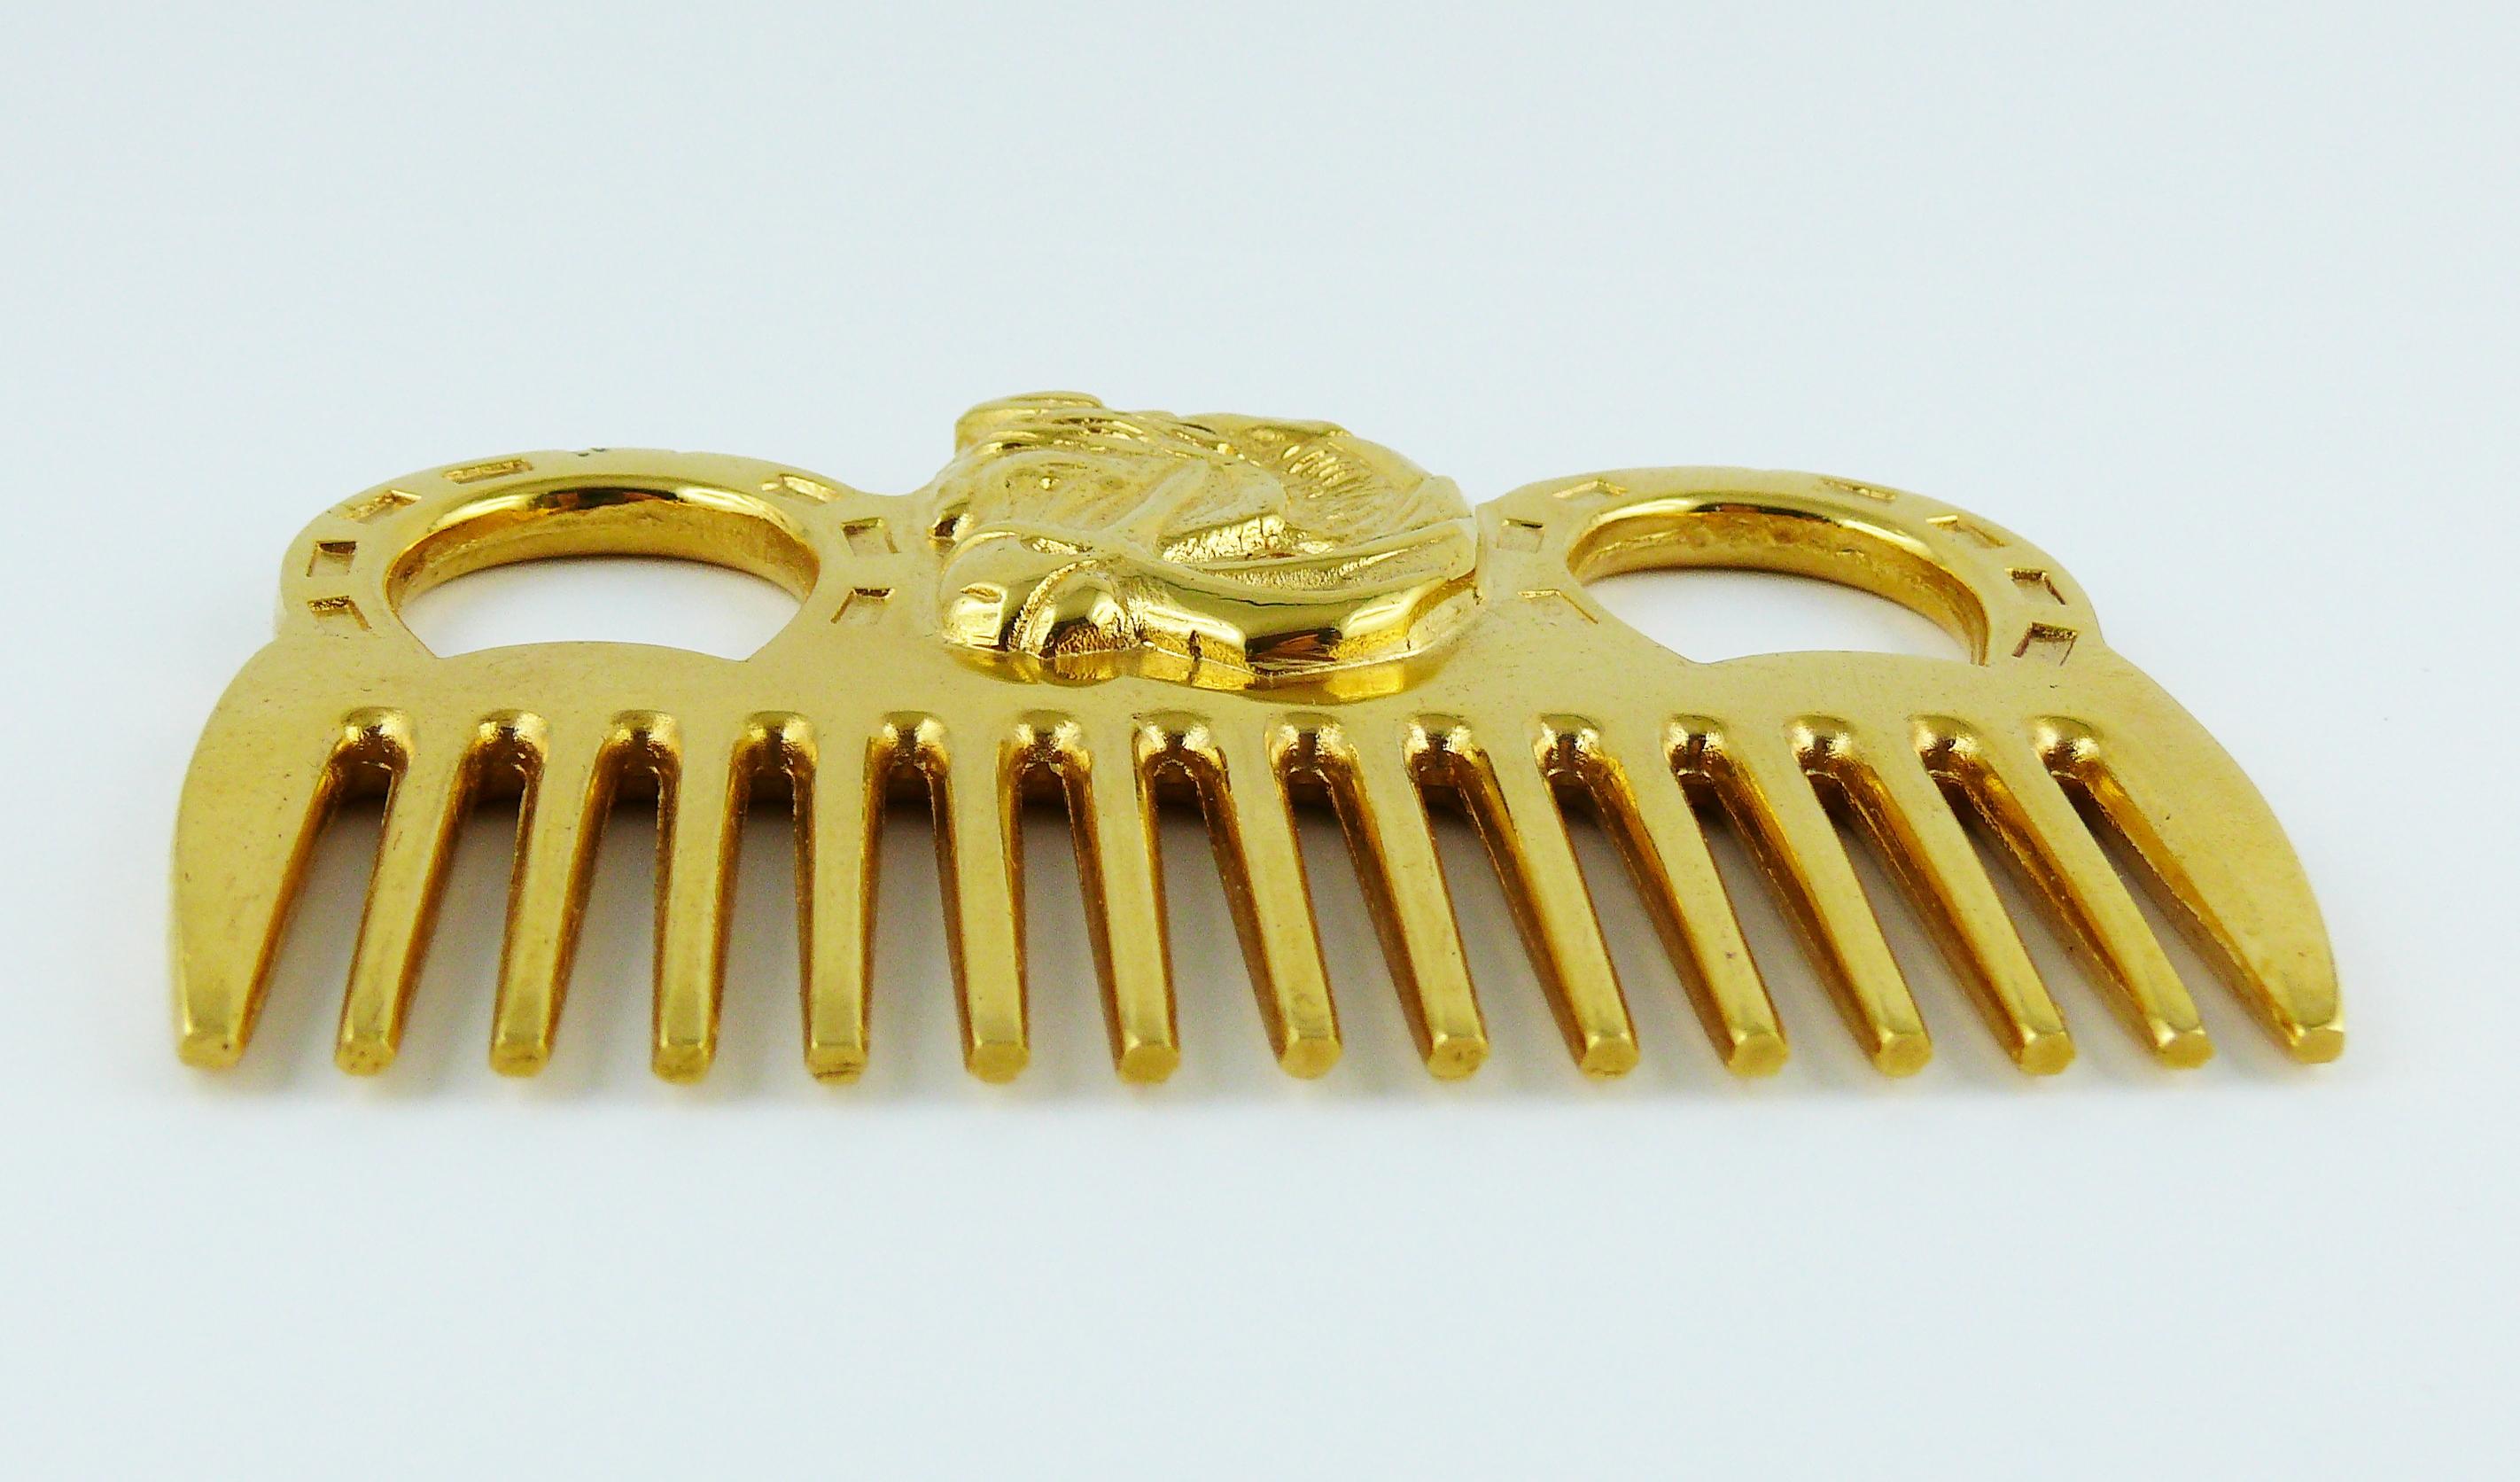 HERMES vintage gold toned horse comb featuring an equestrian design at front.

Embossed HERMES.

Indicative measurements : max. length approx. 9.8 cm (3.86 inches) / max. width approx. 6.8 cm (2.68 inches).

JEWELRY CONDITION CHART
- New or never